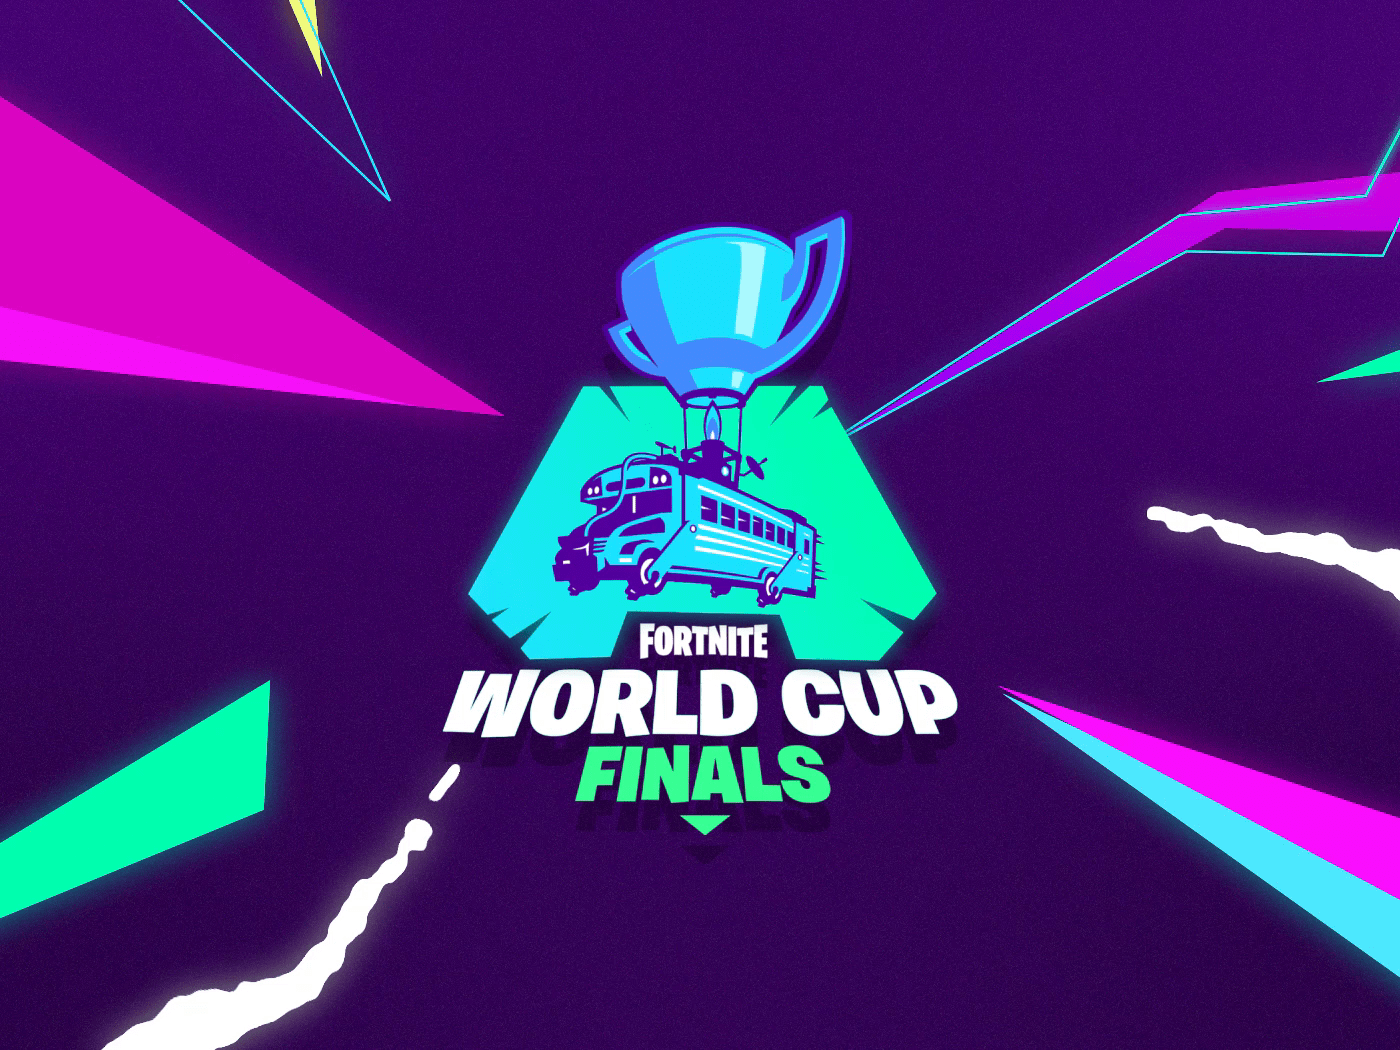 Fortnite World Cup Wallpapers Top Free Fortnite World Cup Backgrounds Wallpaperaccess